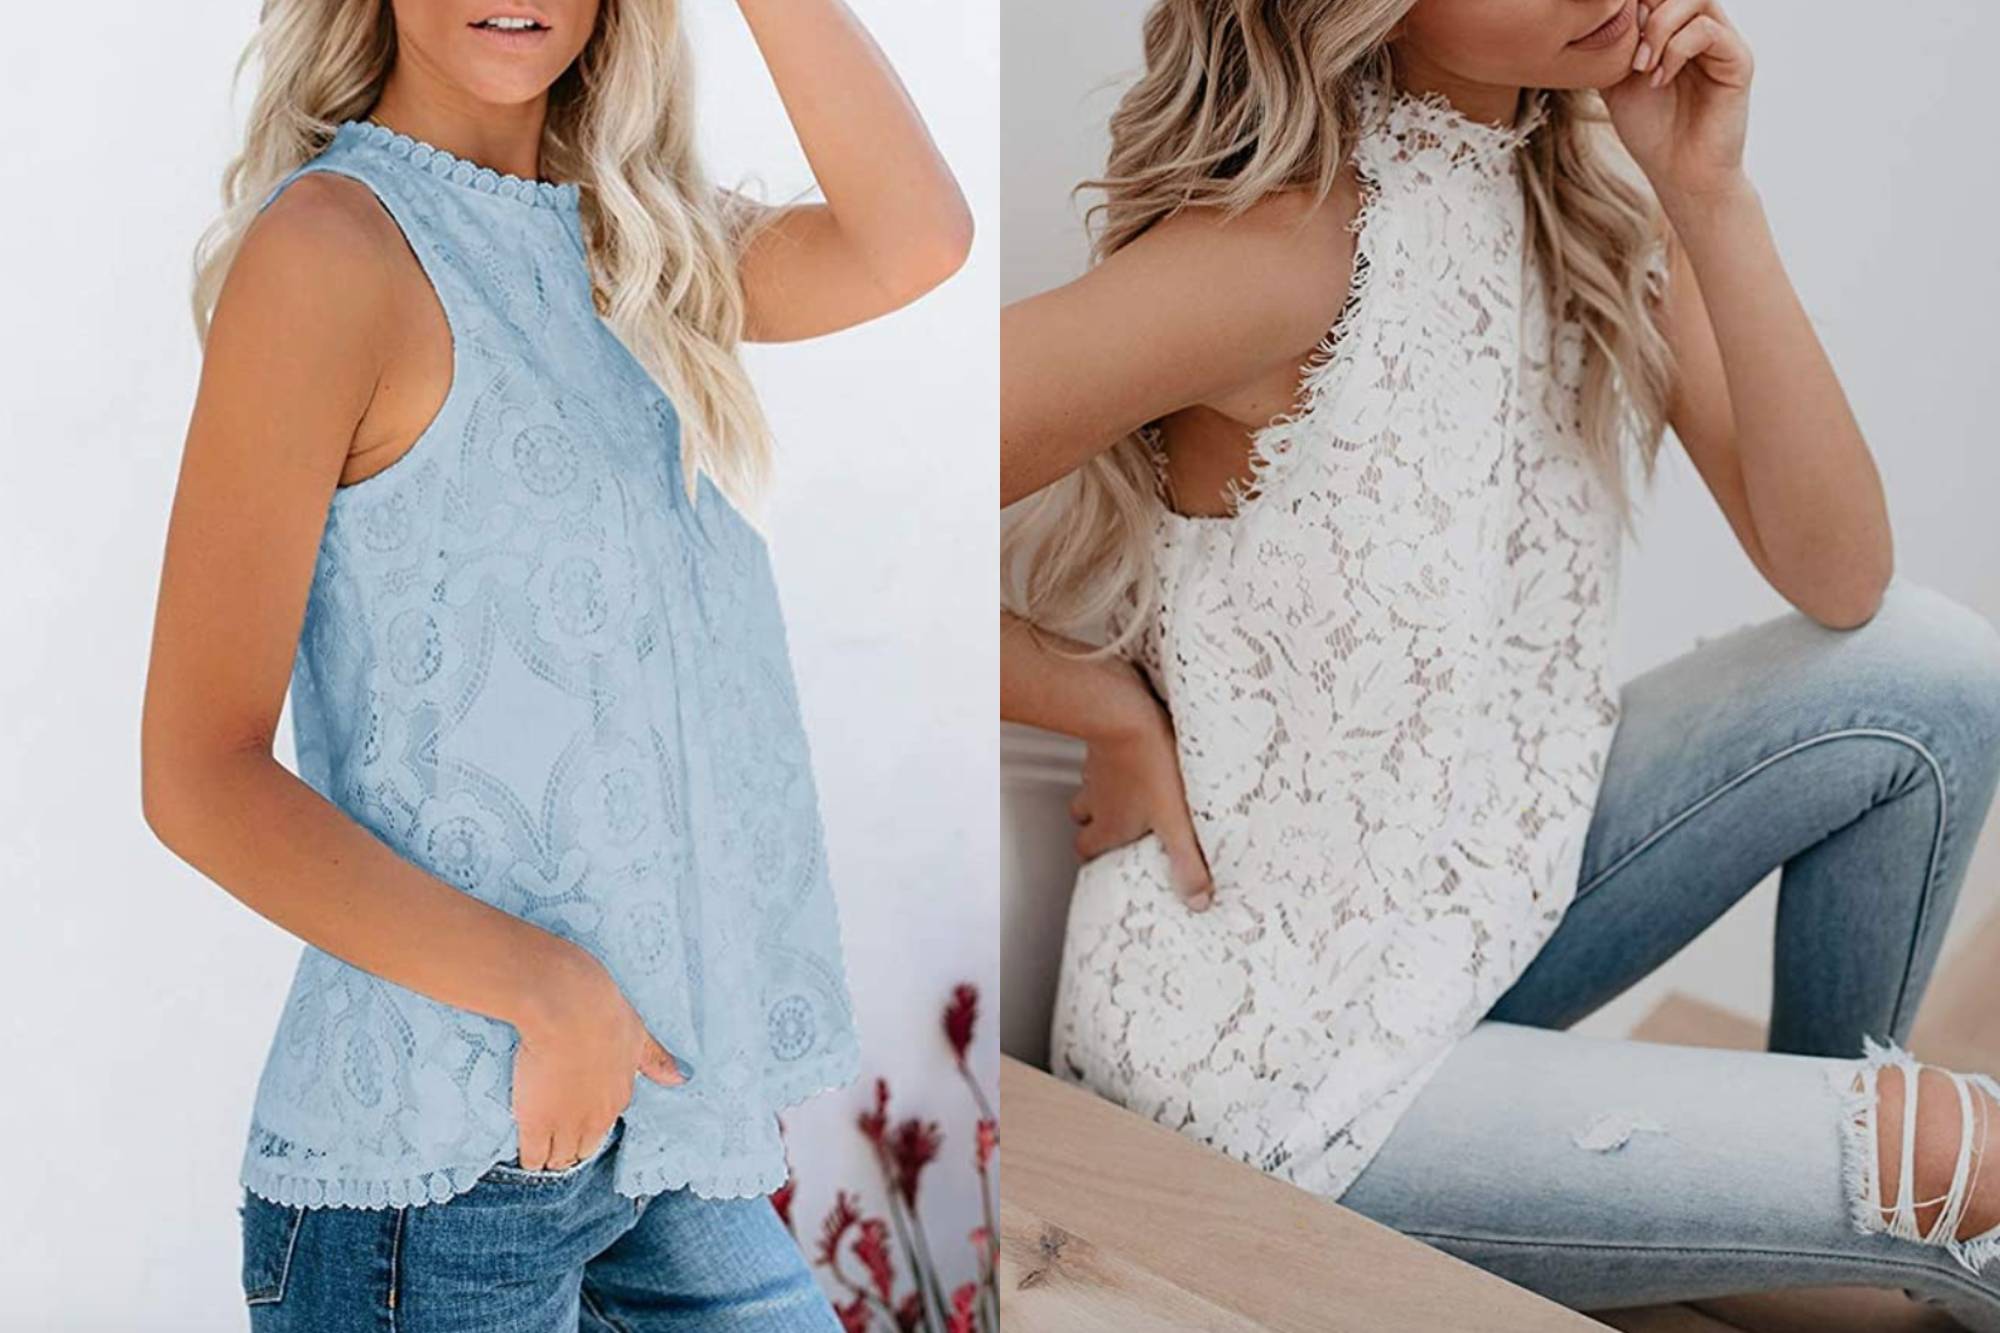 Amazon Shoppers Are Seriously Impressed With This Lacy Halter Top